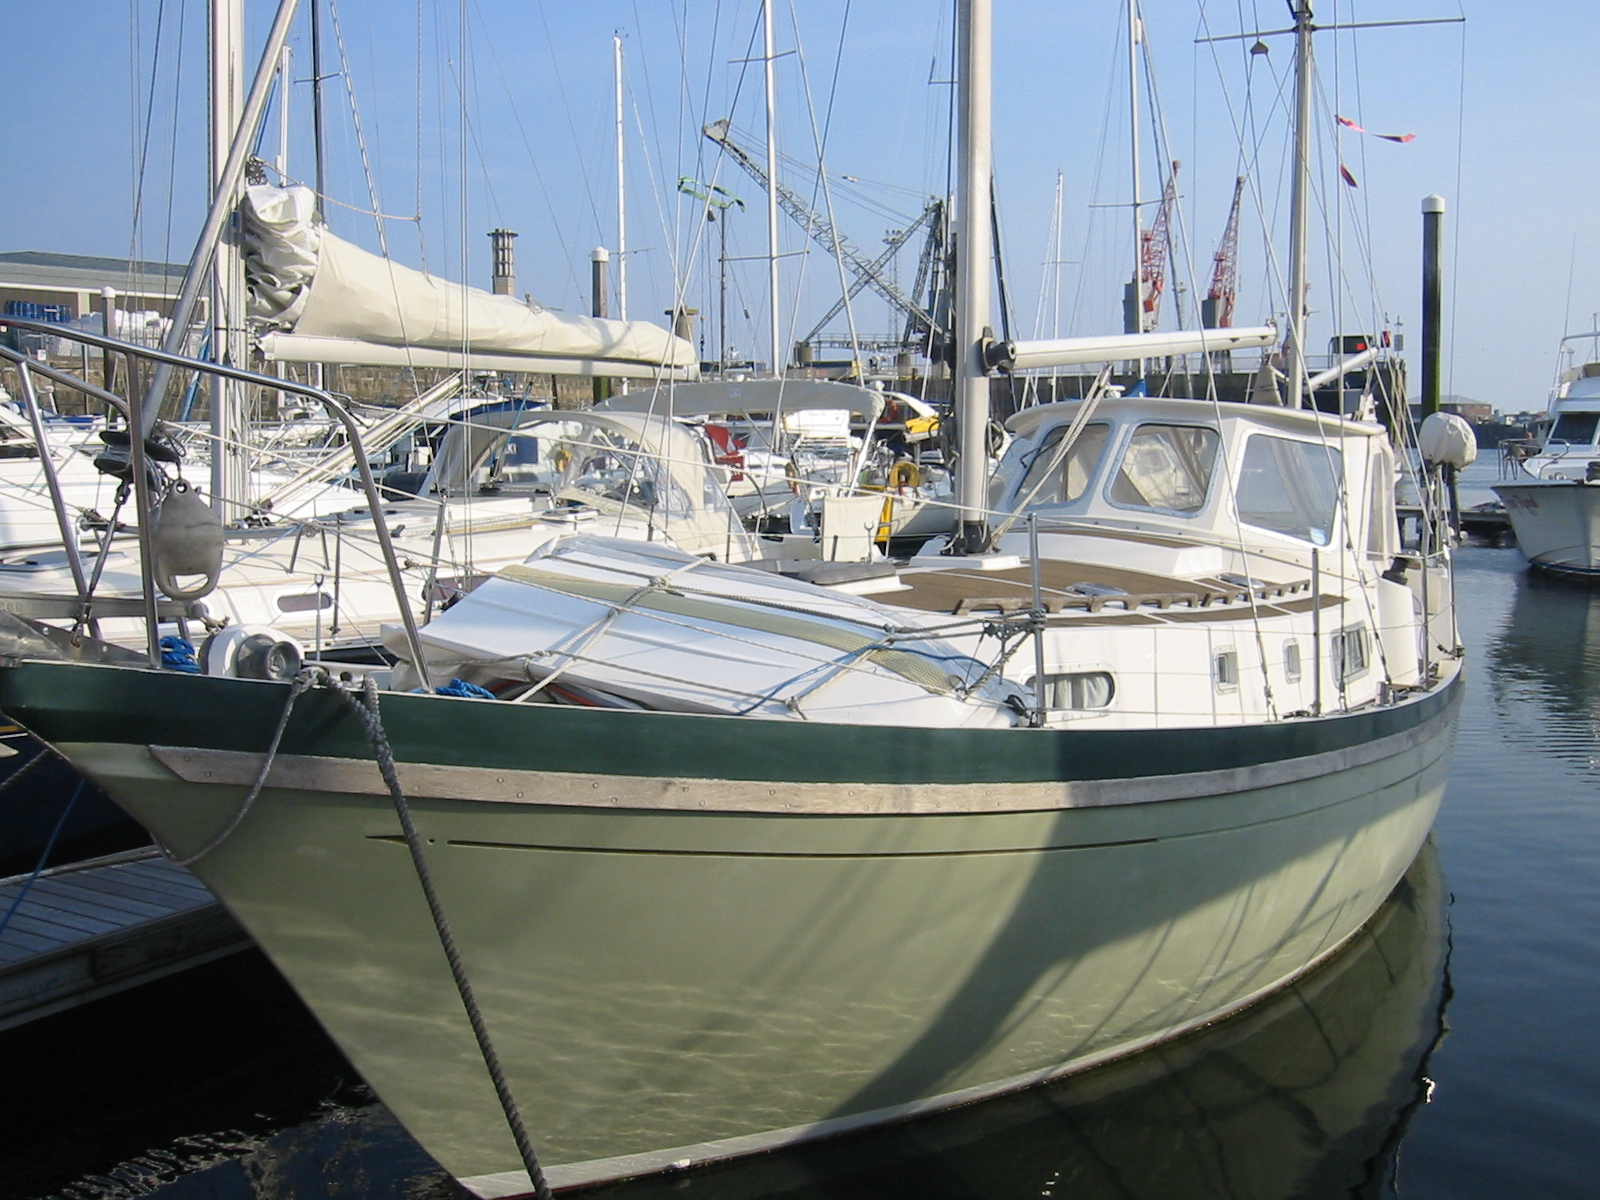 Simple Sailing Low Cost Cruising: Understanding Boat Hull ...